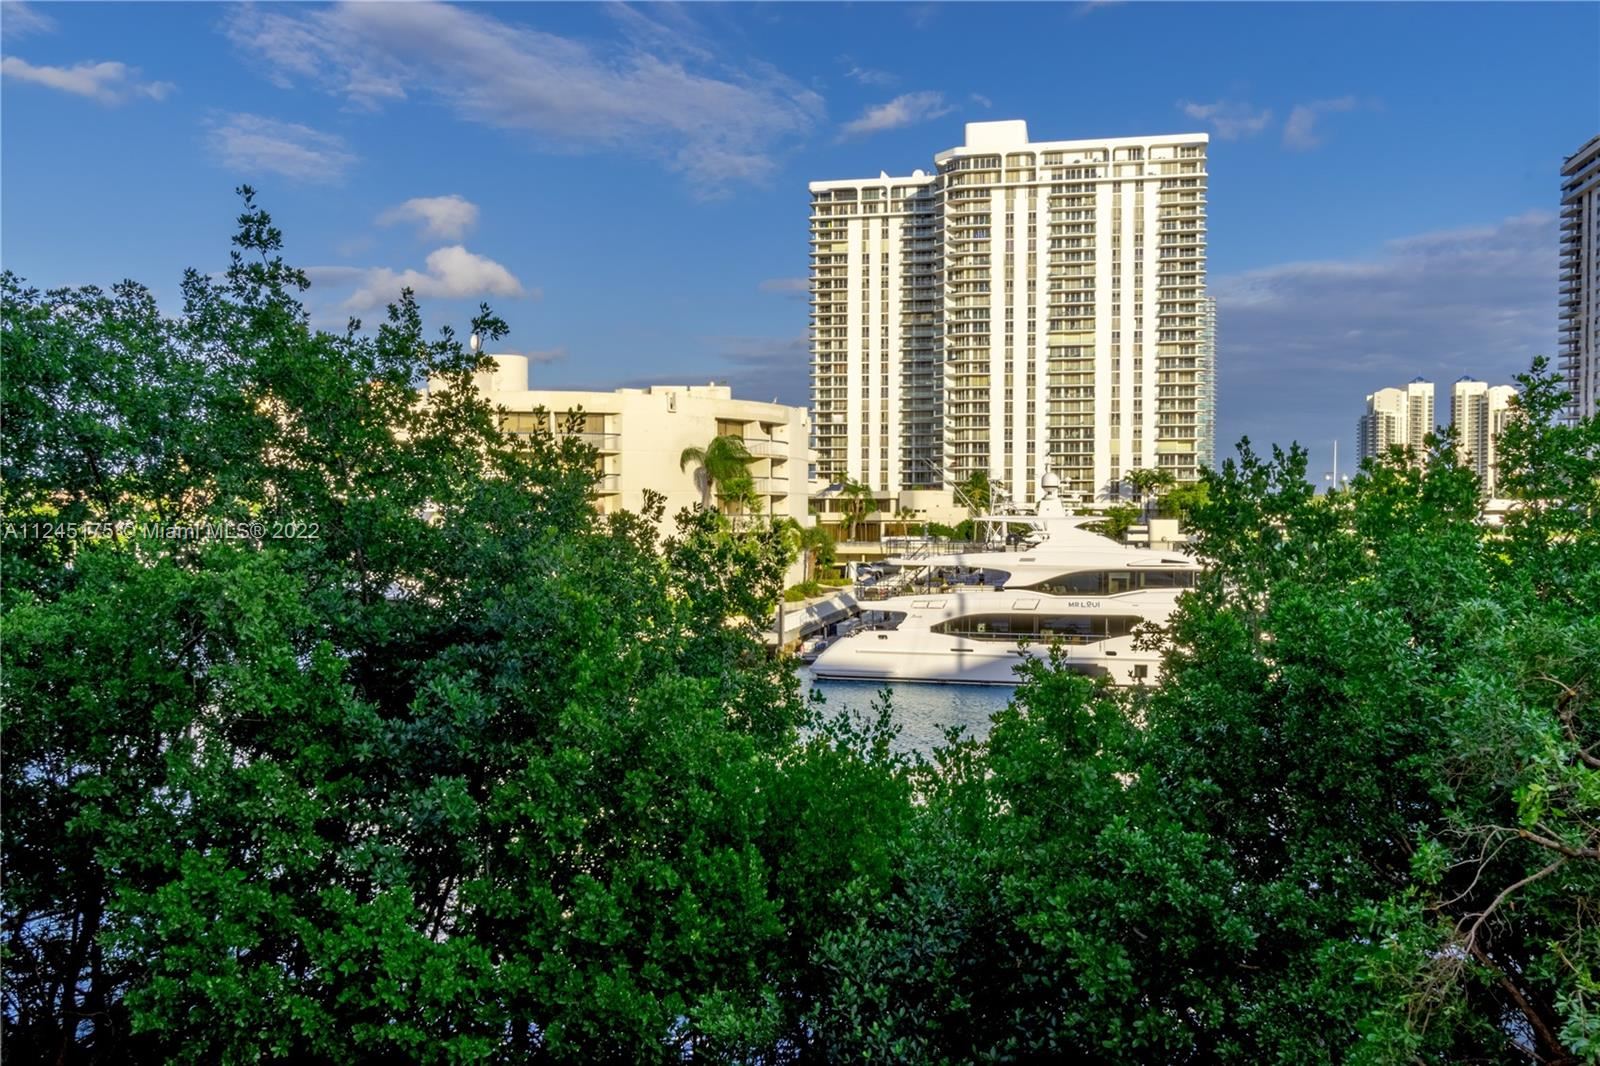 Photo 12 of Listing MLS a11245175 in 19999 E Country Club Dr #1307 Aventura FL 33180